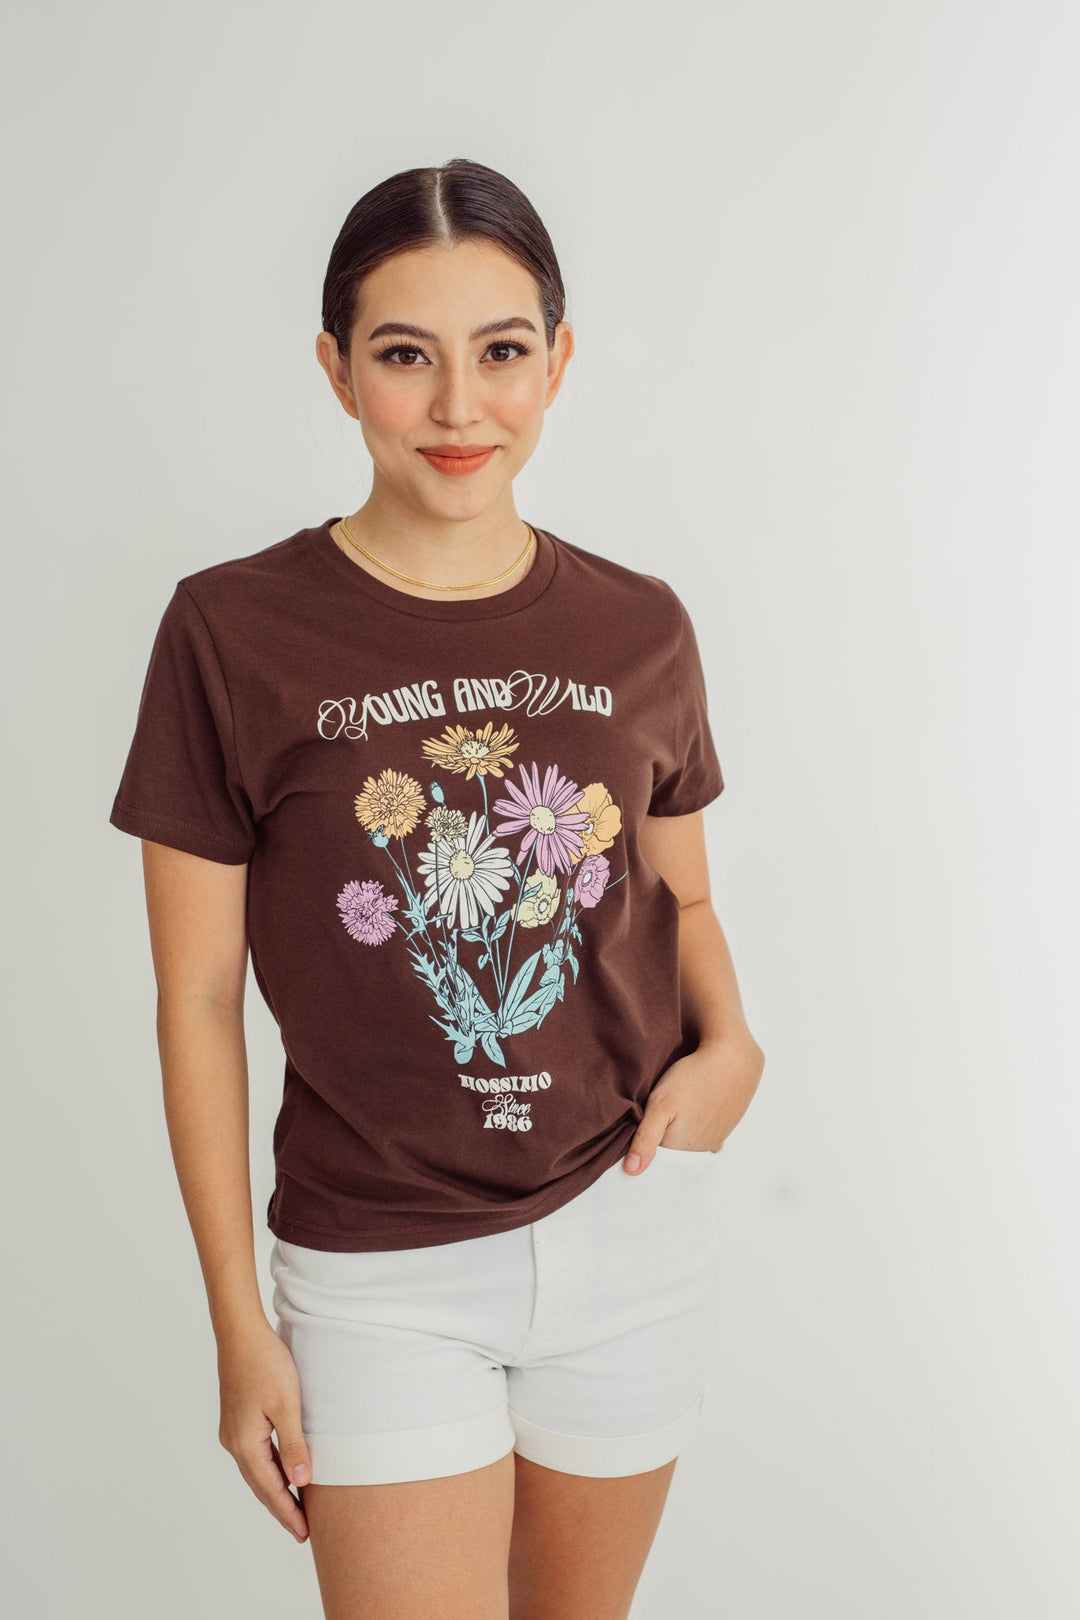 Choco Brown Young and Wild with Soft and Touch Design Classic Fit Tee - Mossimo PH